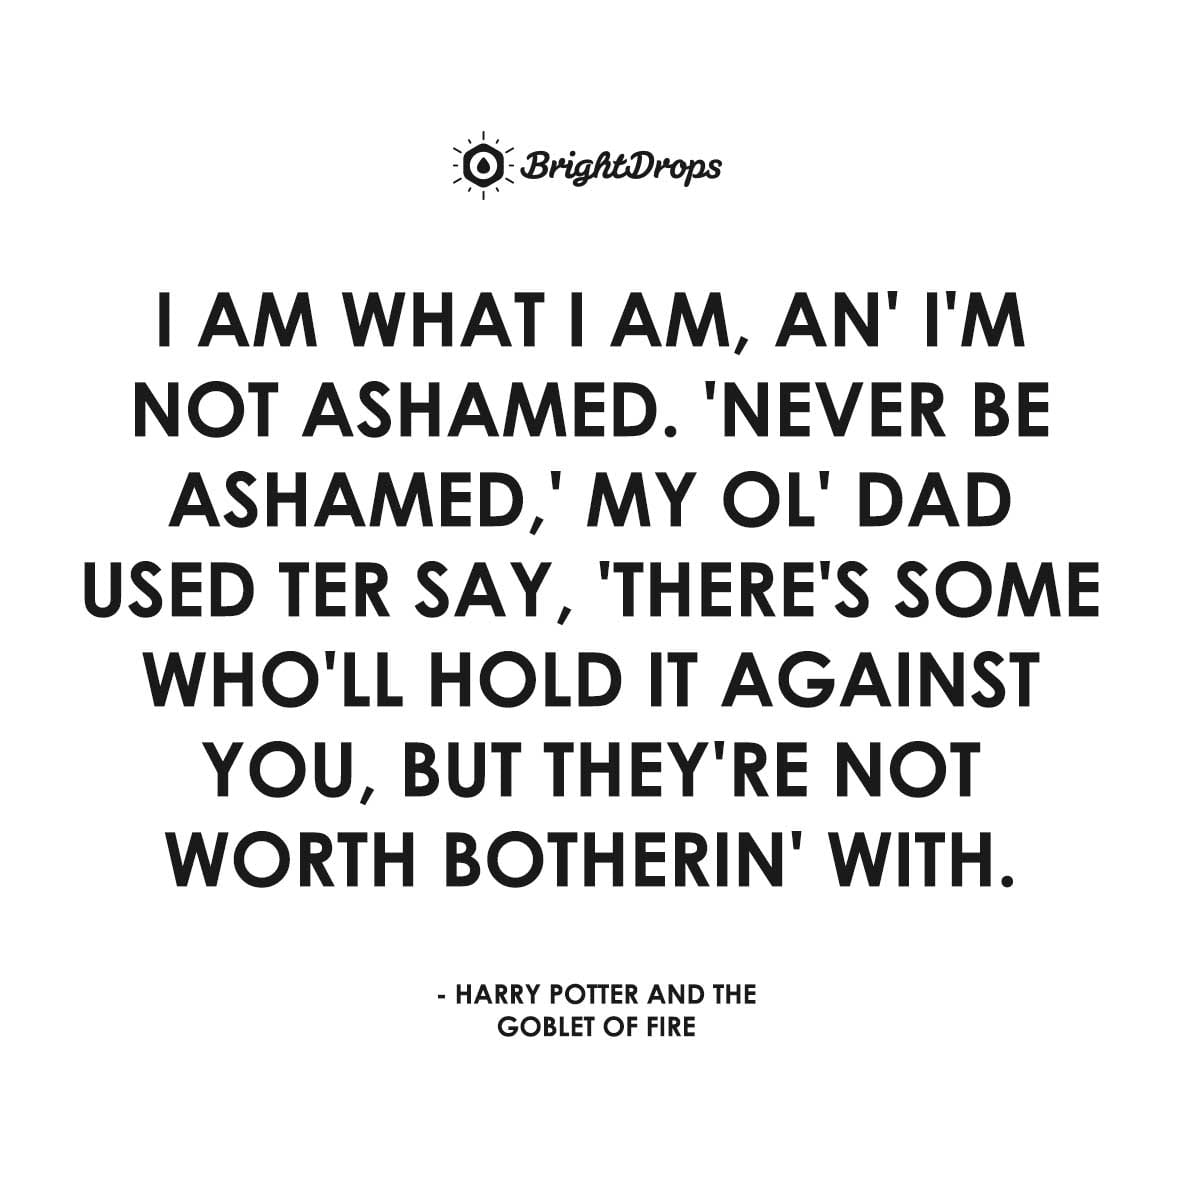 I am what I am, an’ I’m not ashamed. ’Never be ashamed,’ my ol’ dad used ter say, ’there’s some who’ll hold it against you, but they’re not worth botherin’ with. - Harry Potter and the Goblet of Fire